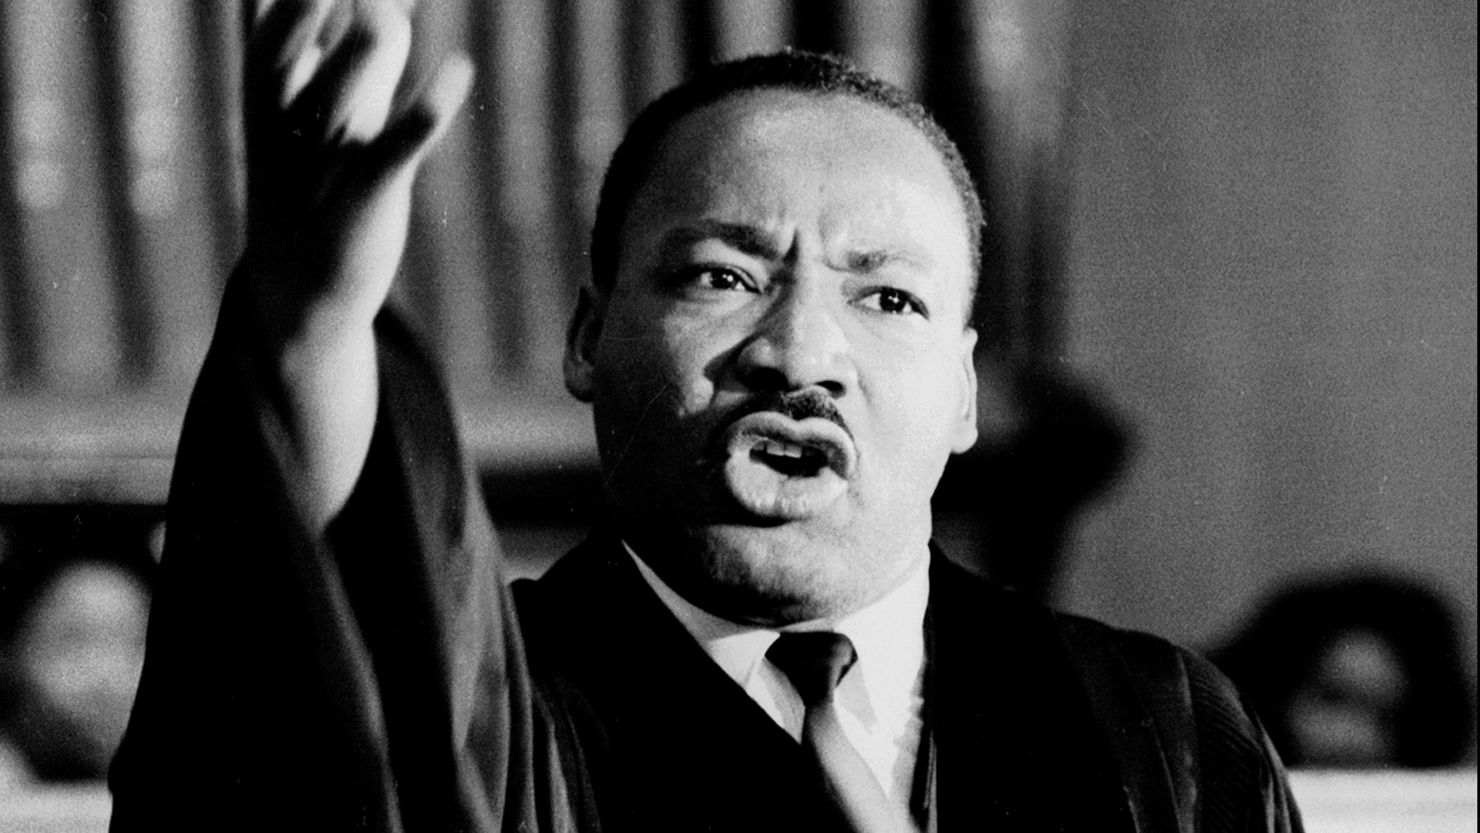 More than 900 U.S. cities have streets named after the Rev. Martin Luther King Jr., who was slain in Memphis in 1968.